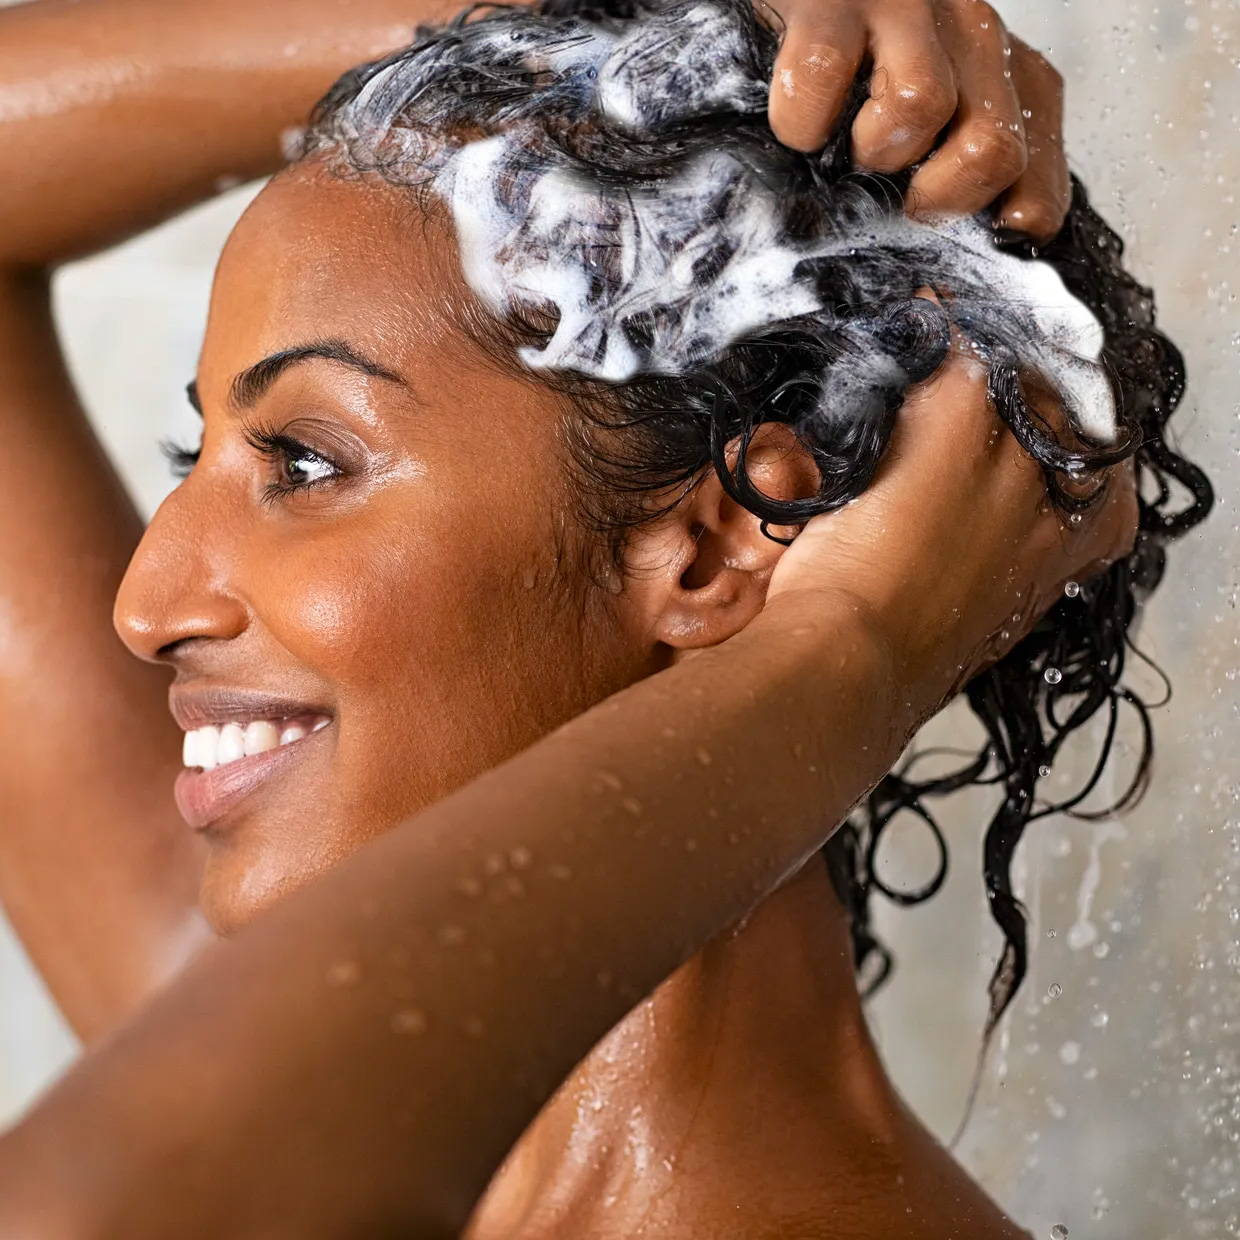 a woman with a darker skin tone washing her hair